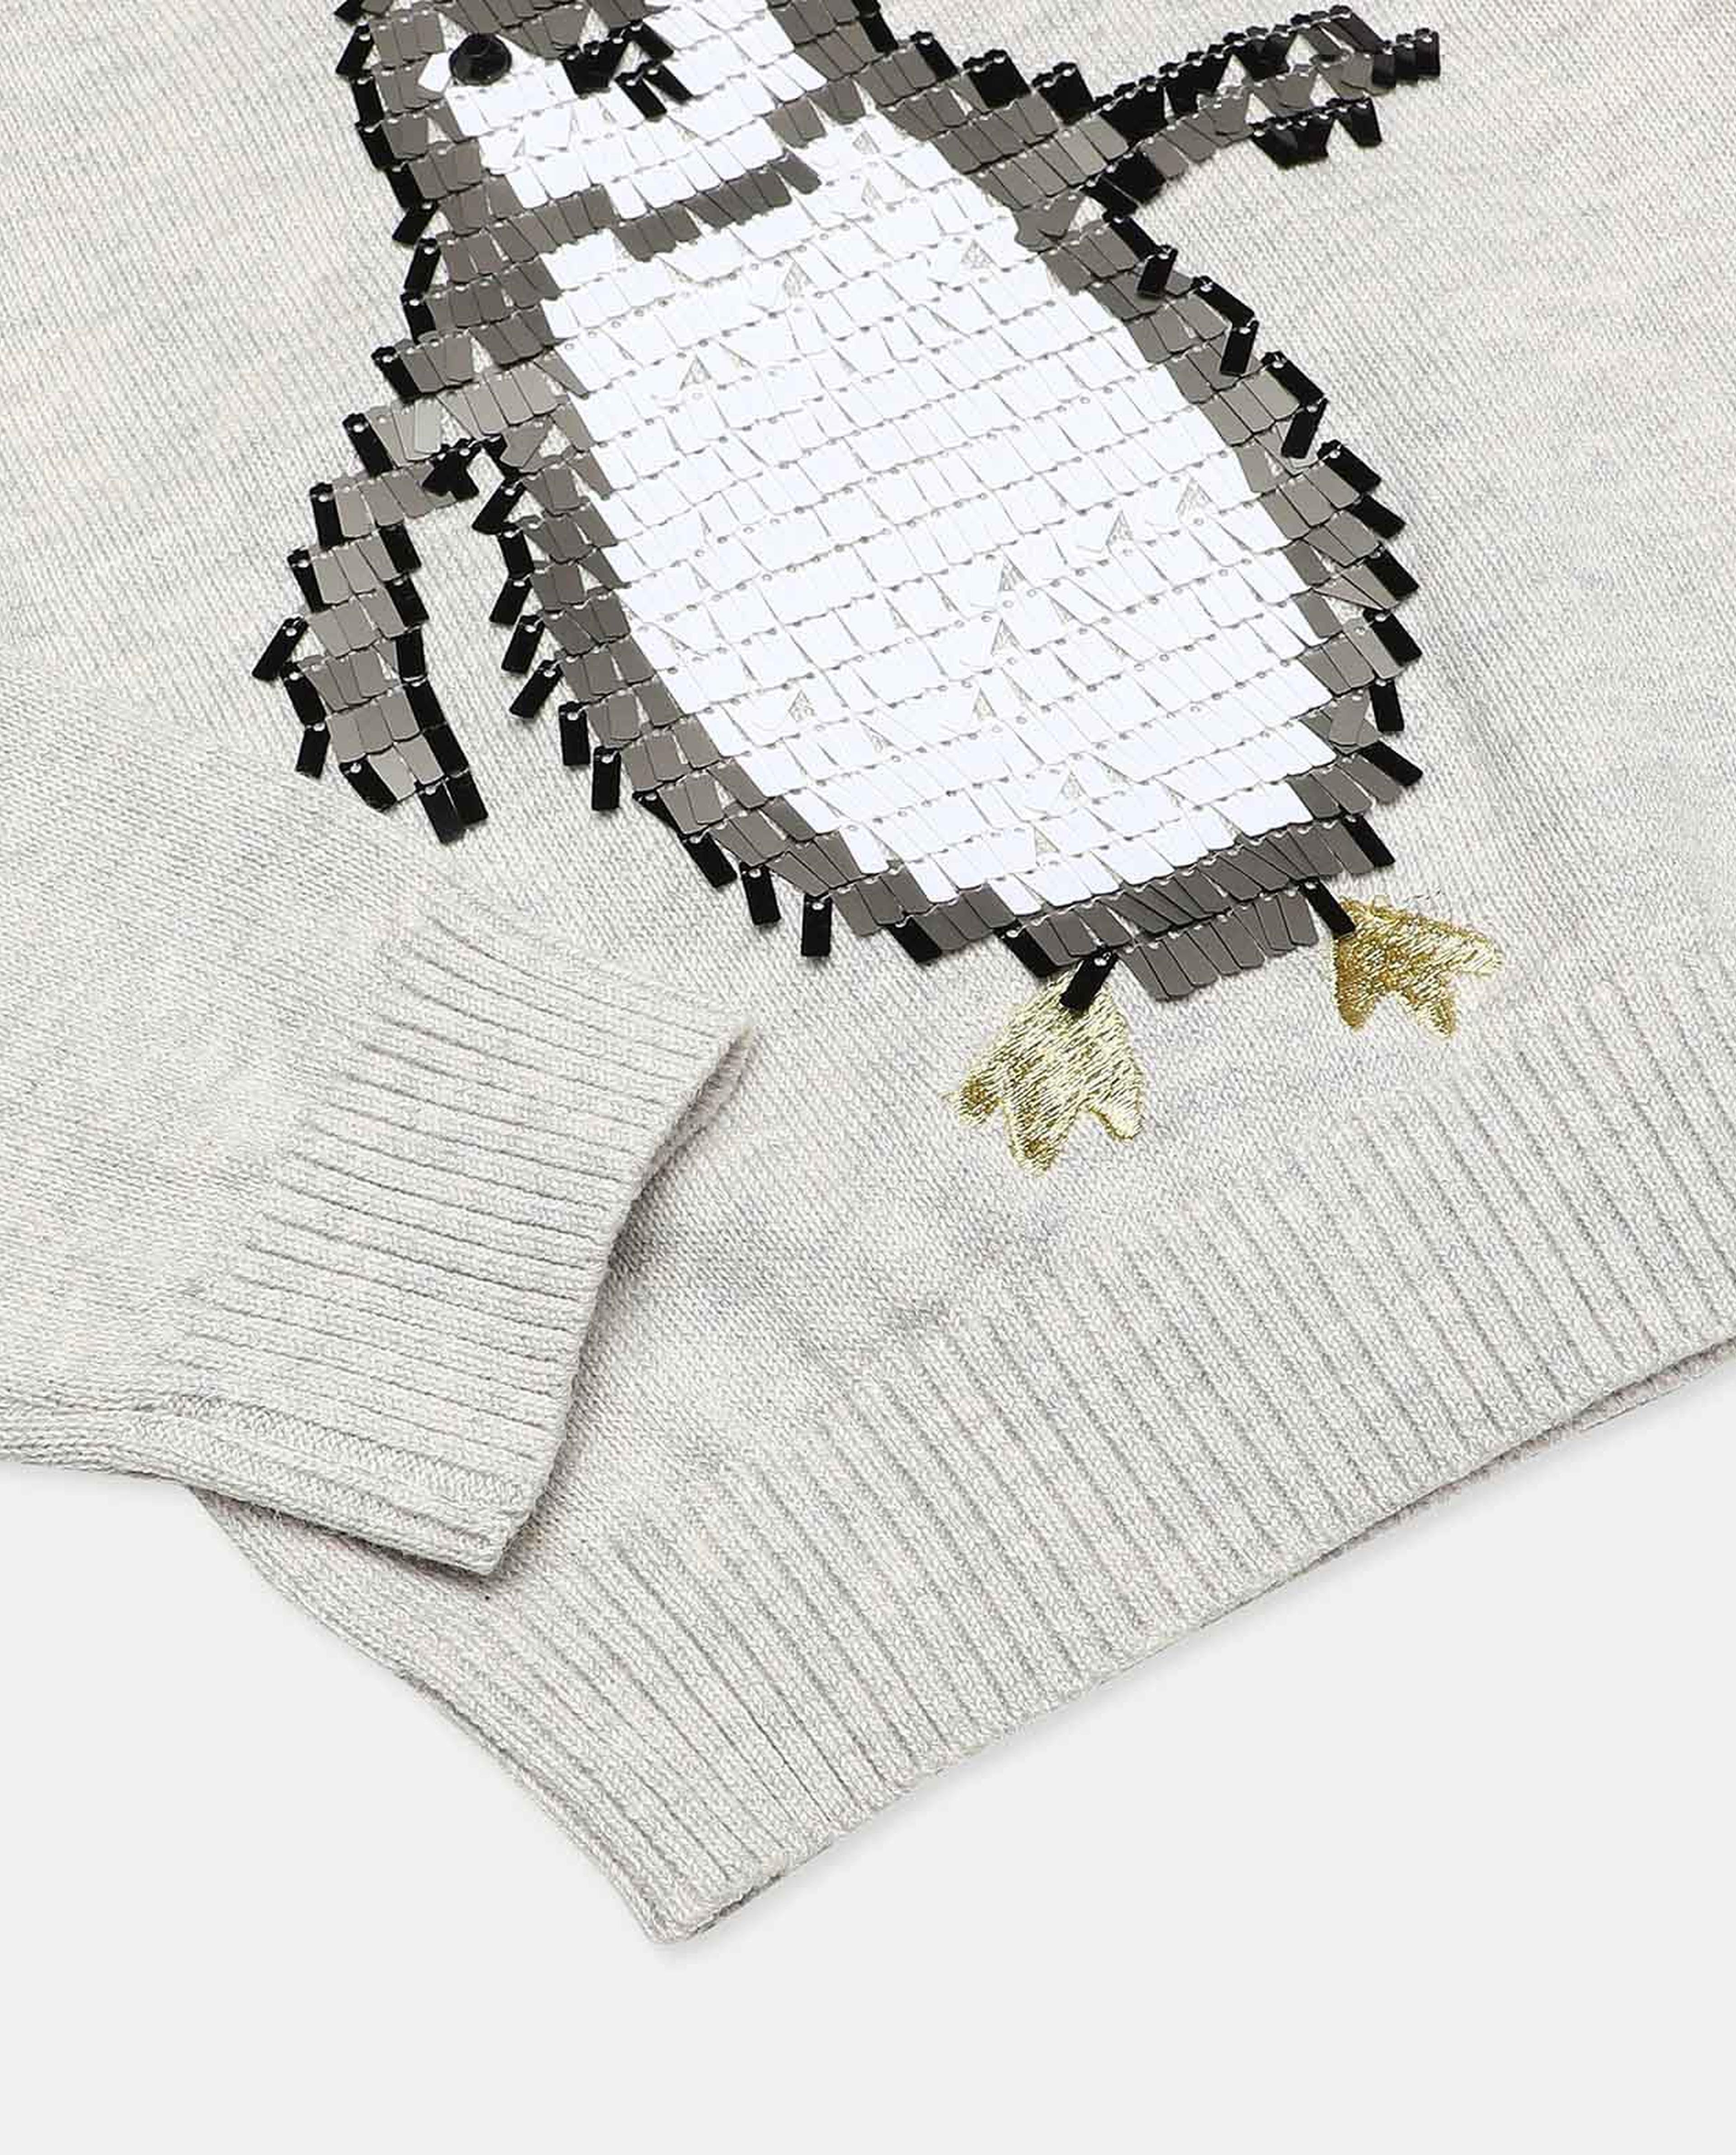 Embellished Sweater with Crew Neck and Long Sleeves